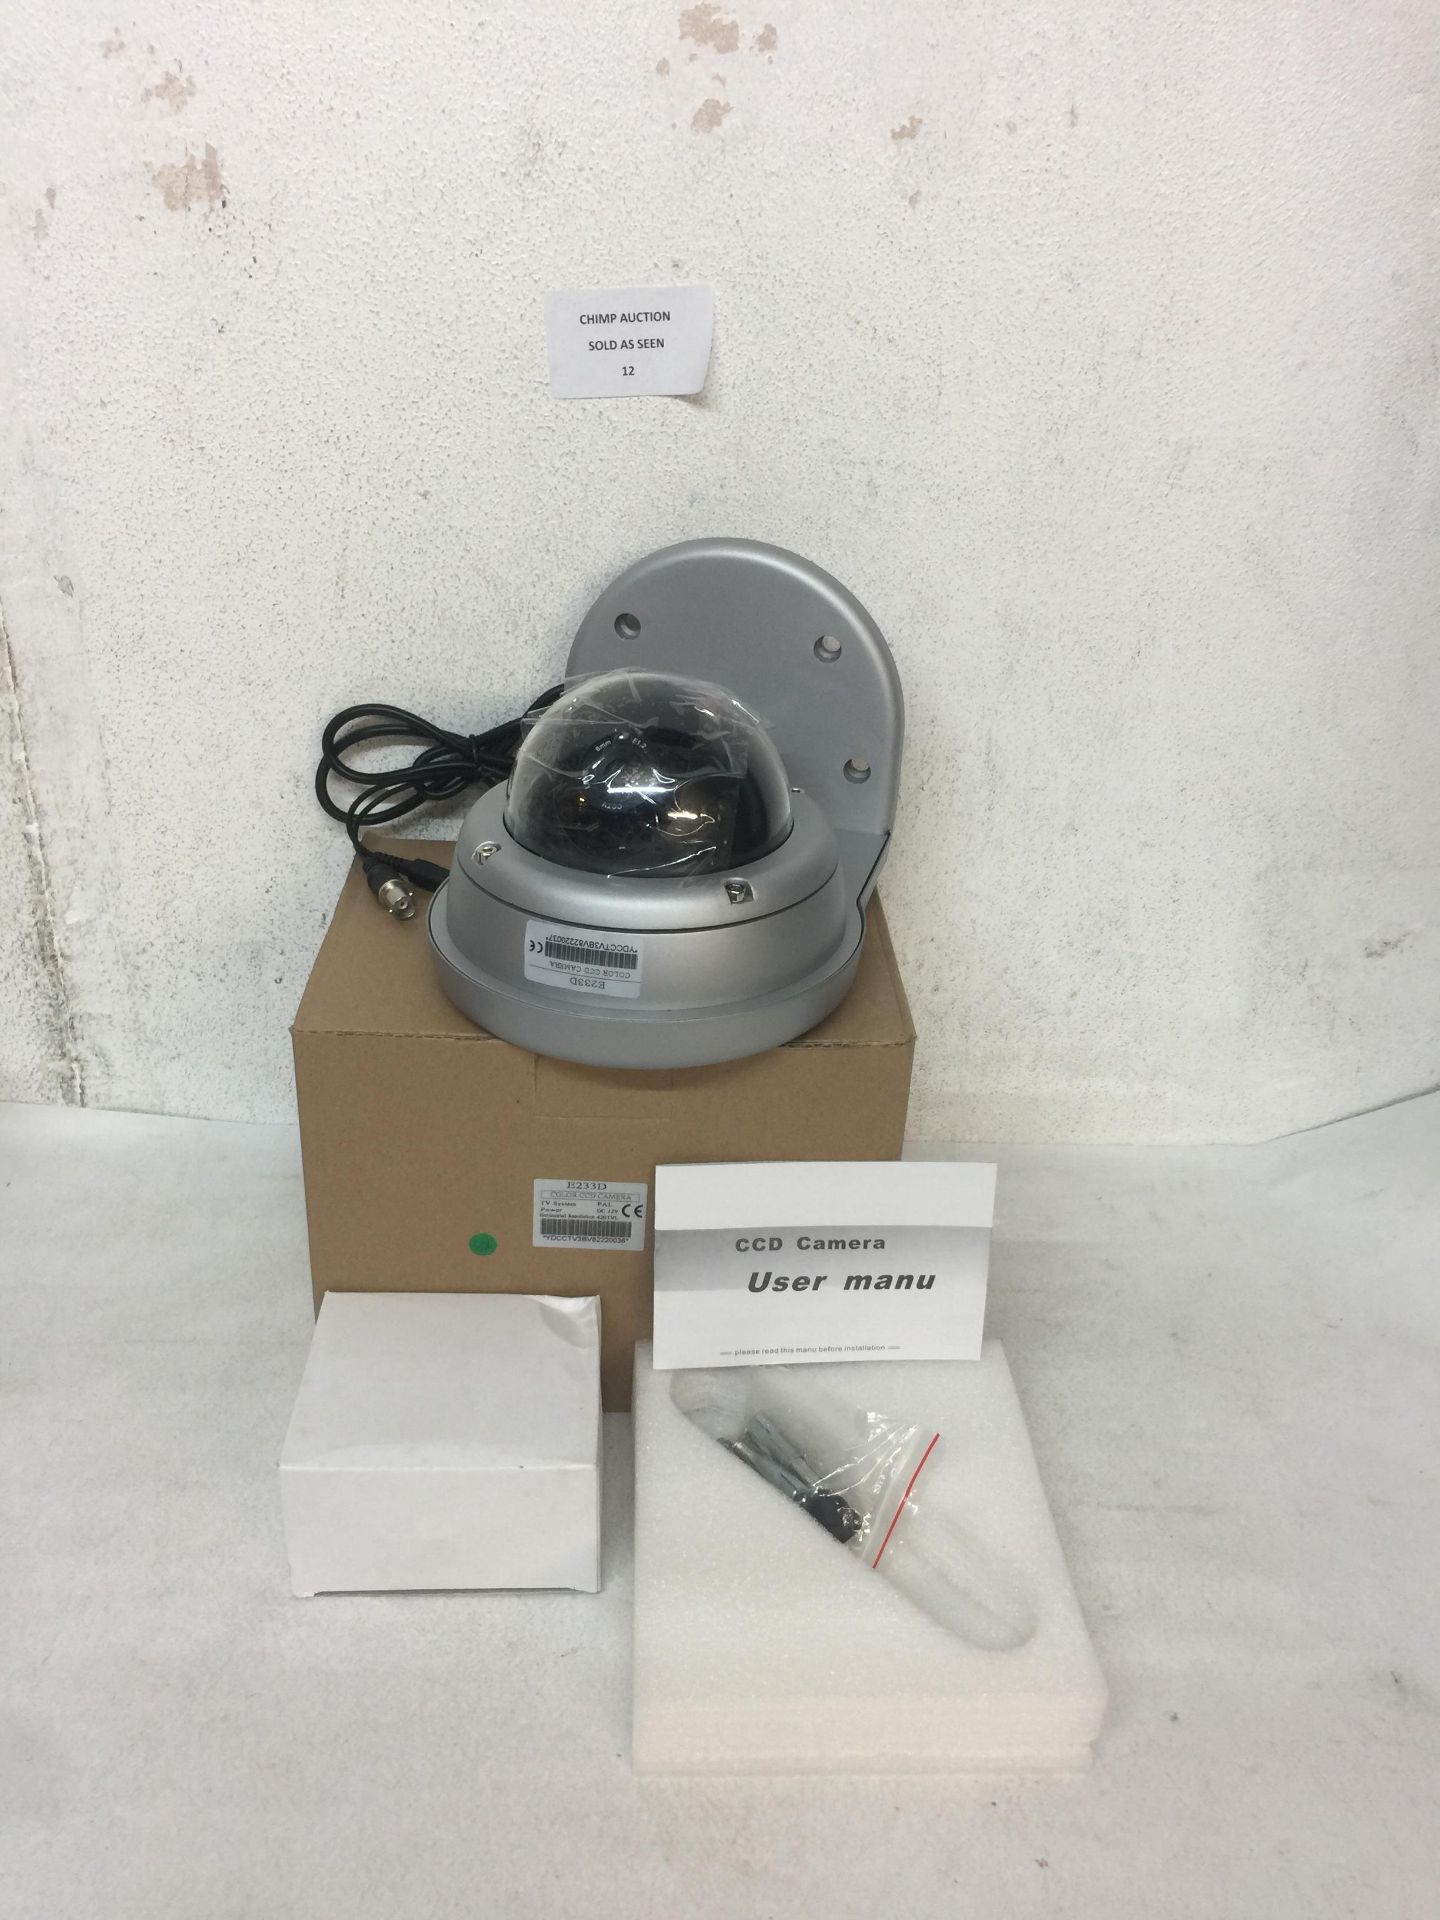 BRAND NEW E233D COLOR CCTV SECURITY CCD CAMERA & BRACKET RRP £79.99.